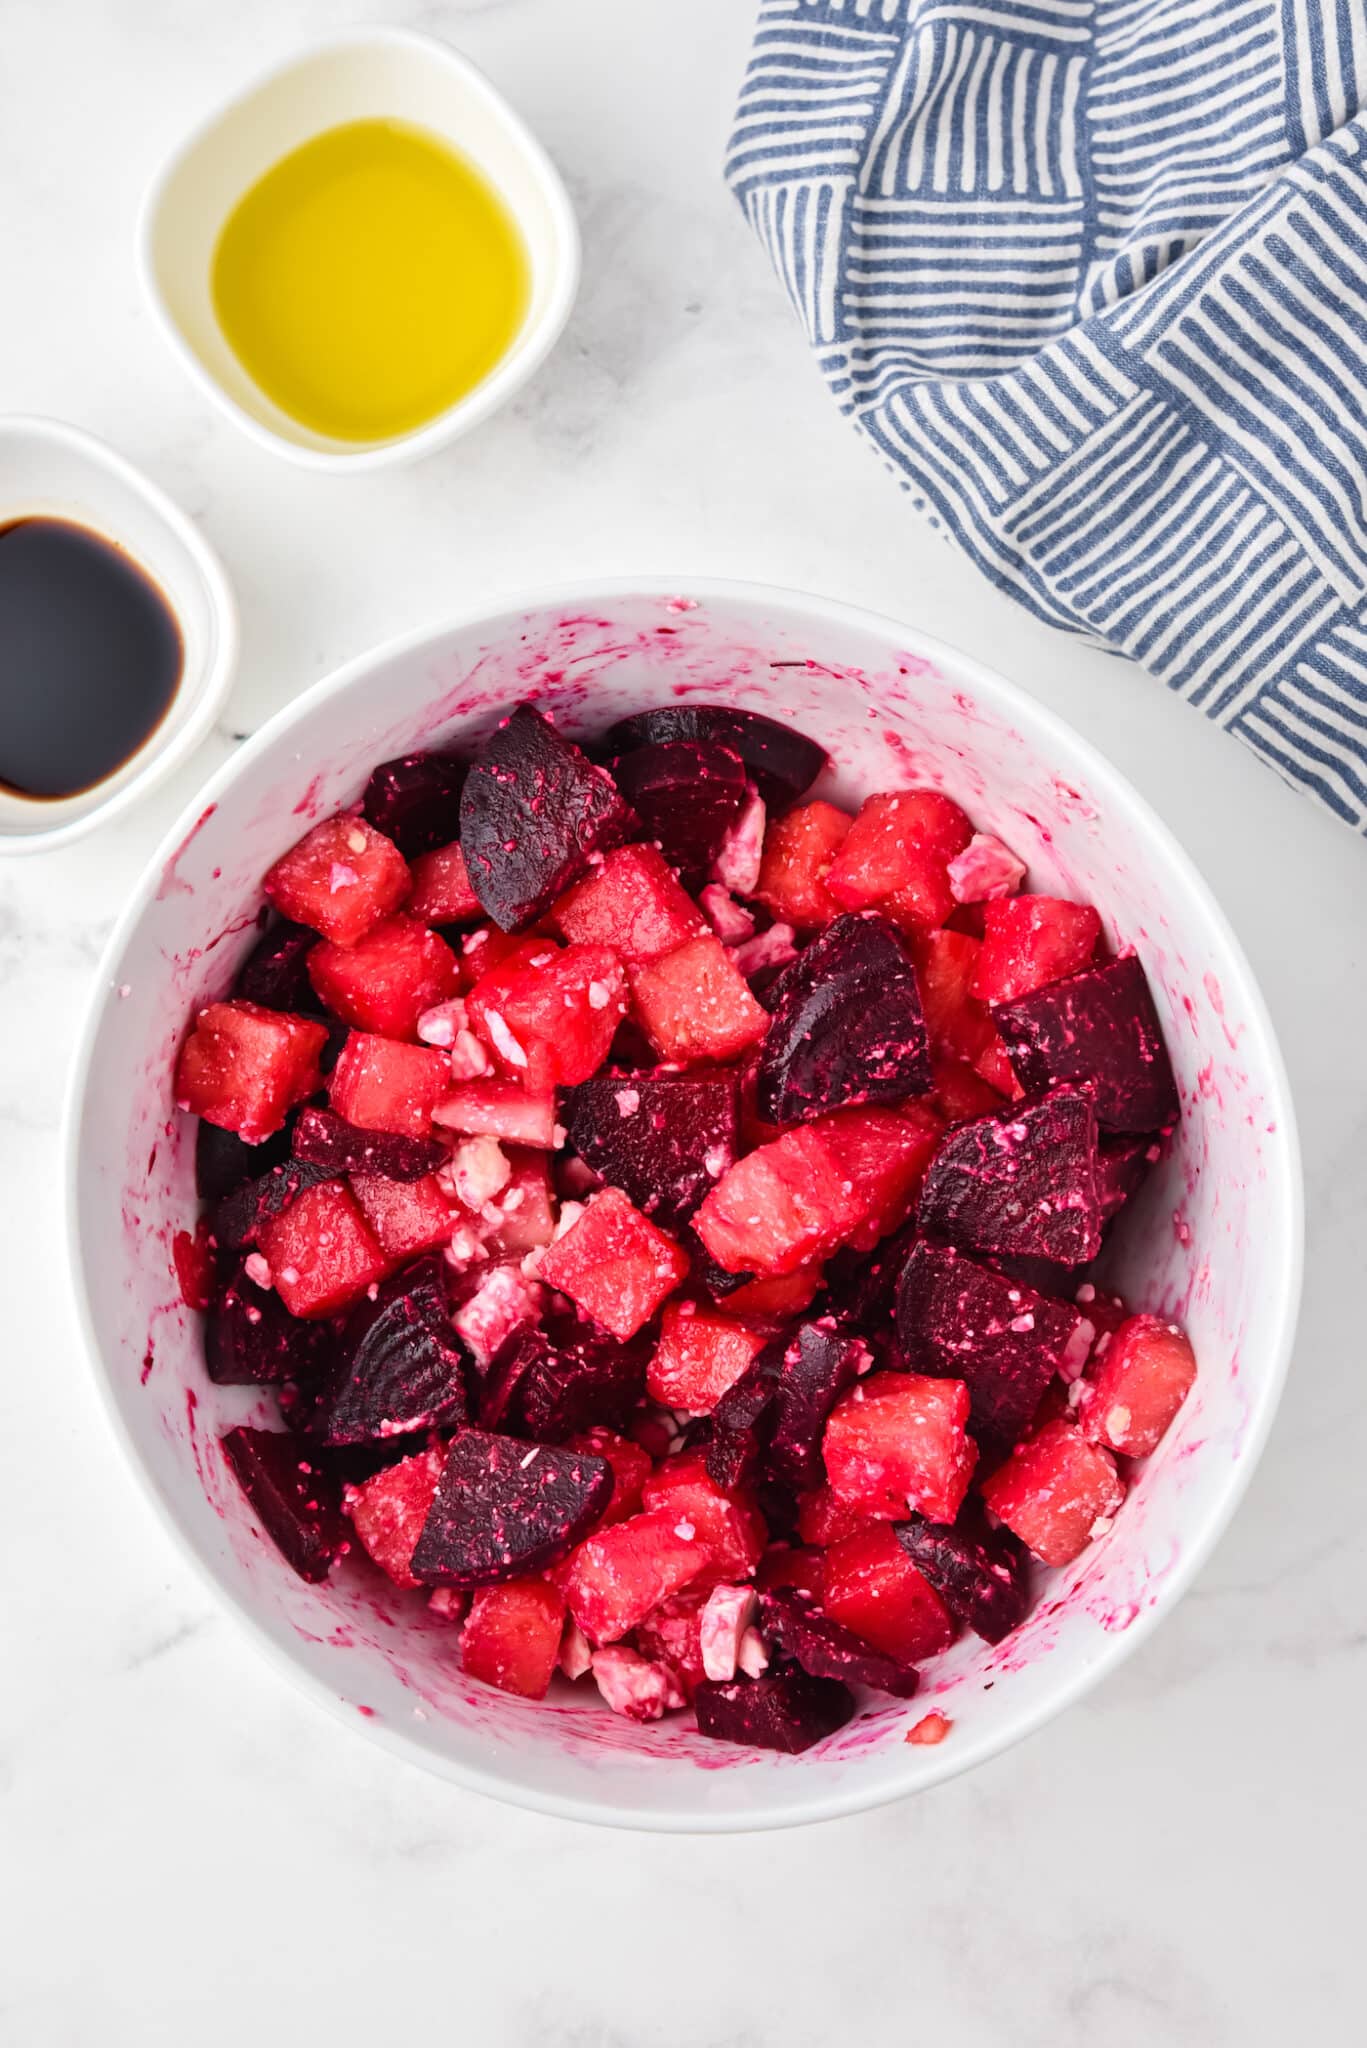 Drizzling and stirring in dressing to a bowl of watermelon beet salad.